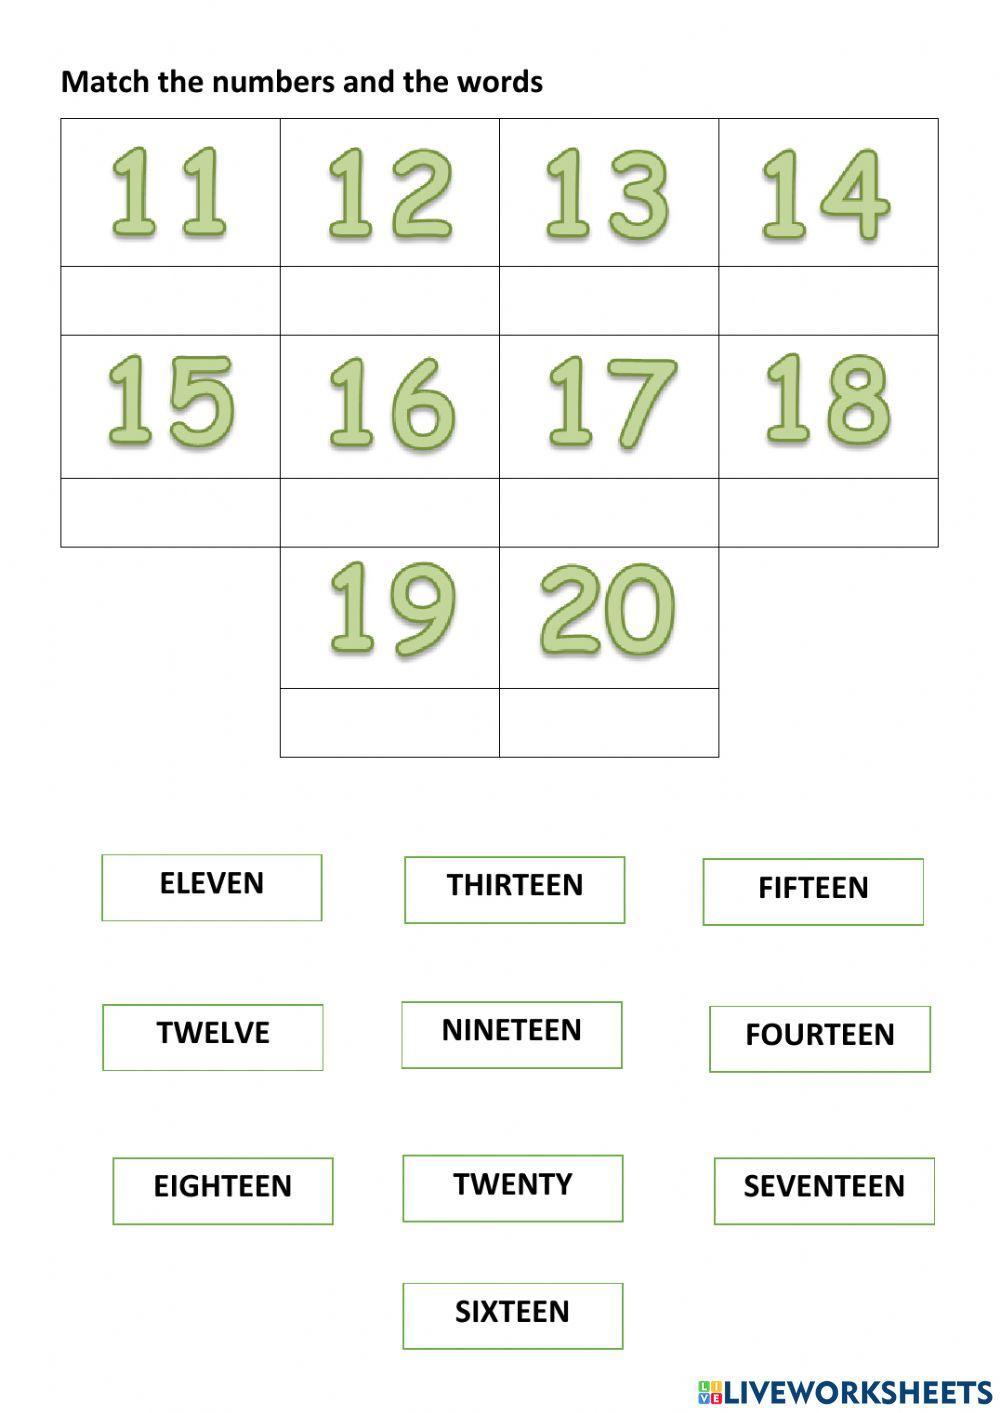 Numbers 11-20 matching worksheet | Live Worksheets